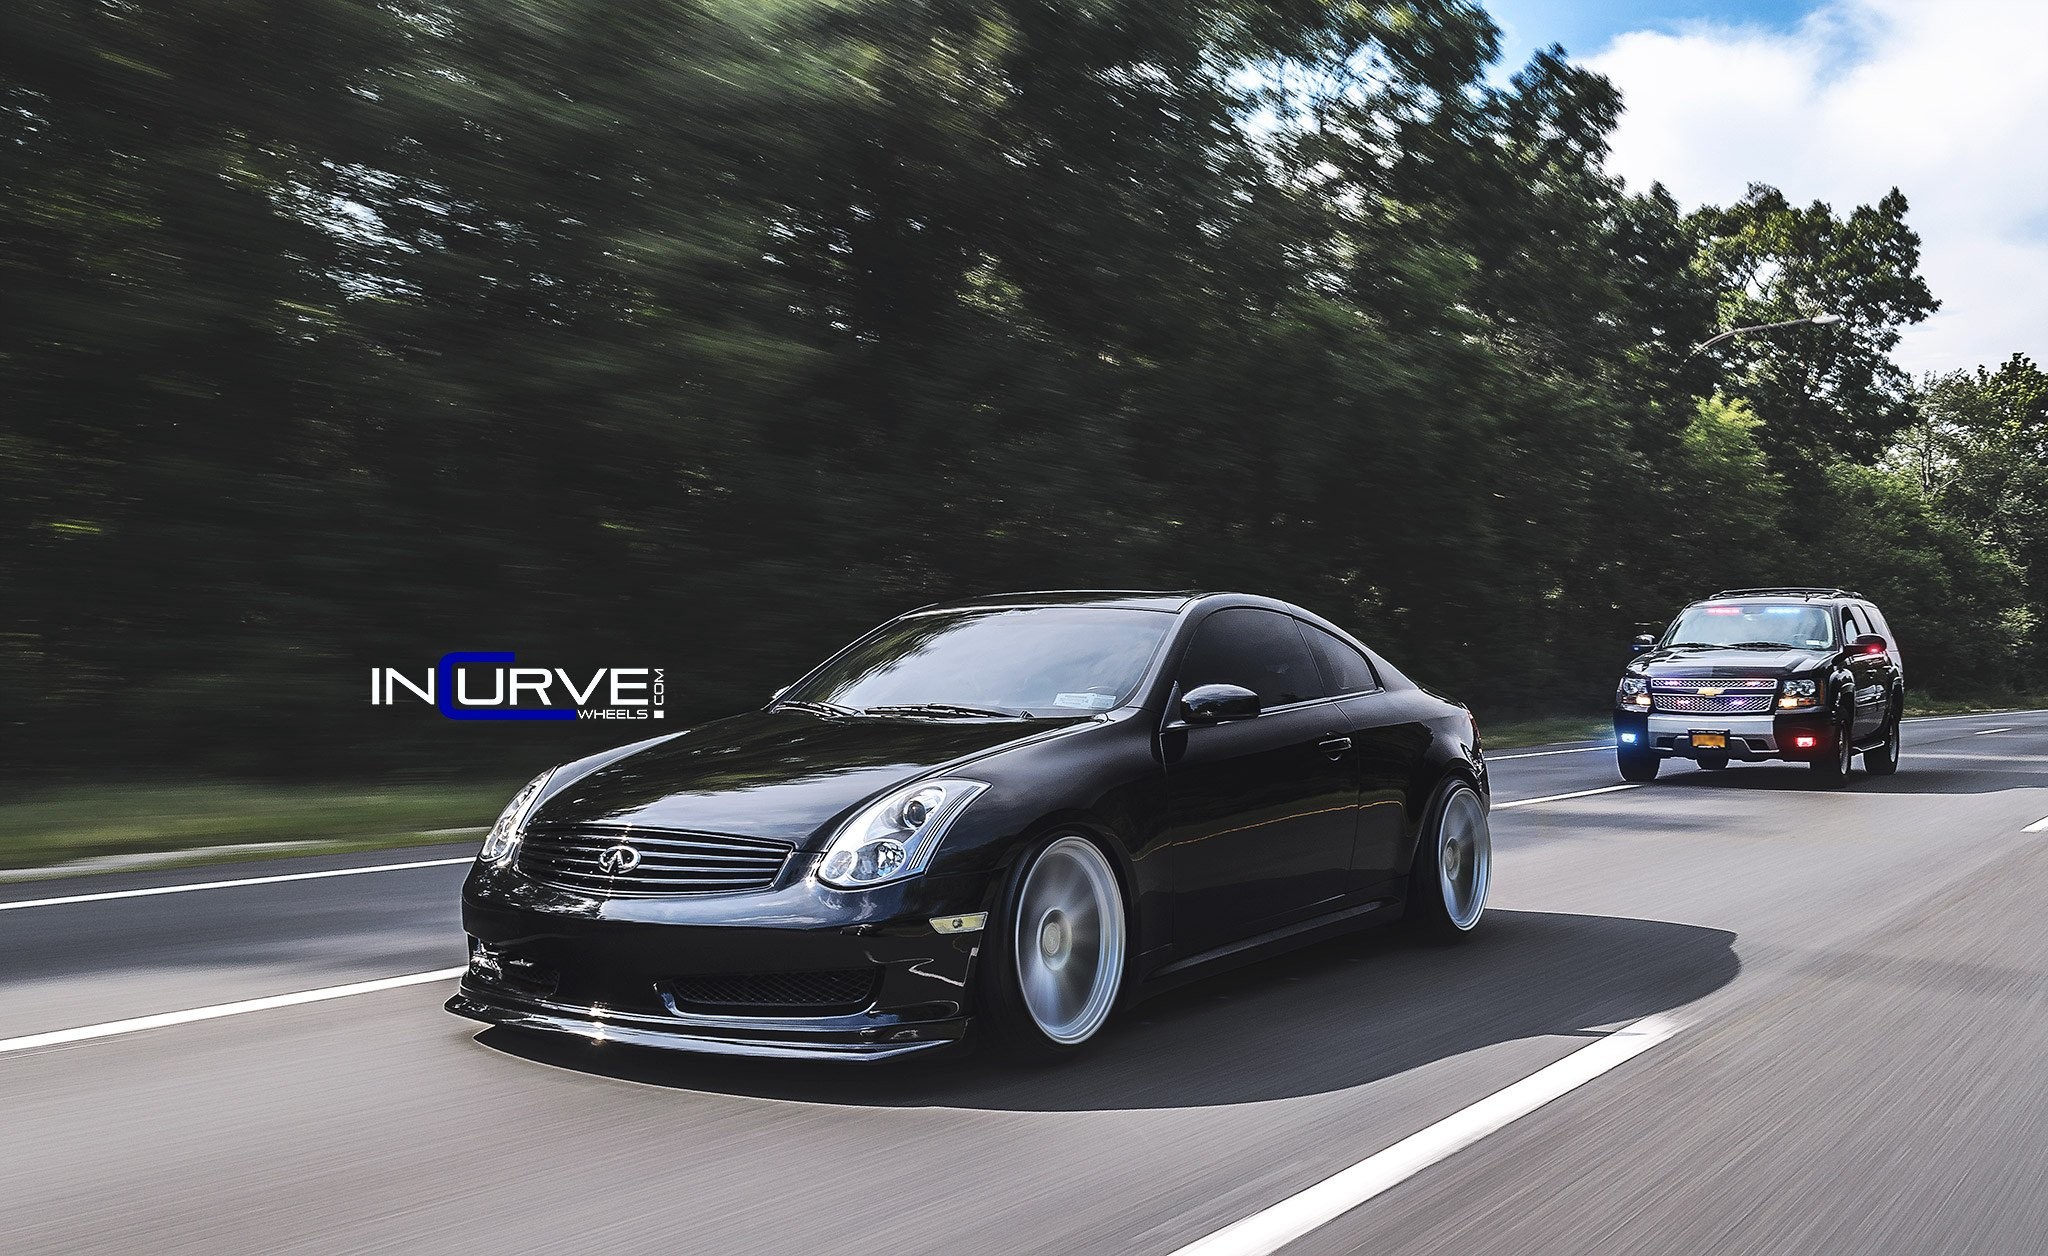 2048x1256 2015 Incurve Wheels cars tuning Infiniti G35 coupe wallpaper |  |  635839 | WallpaperUP